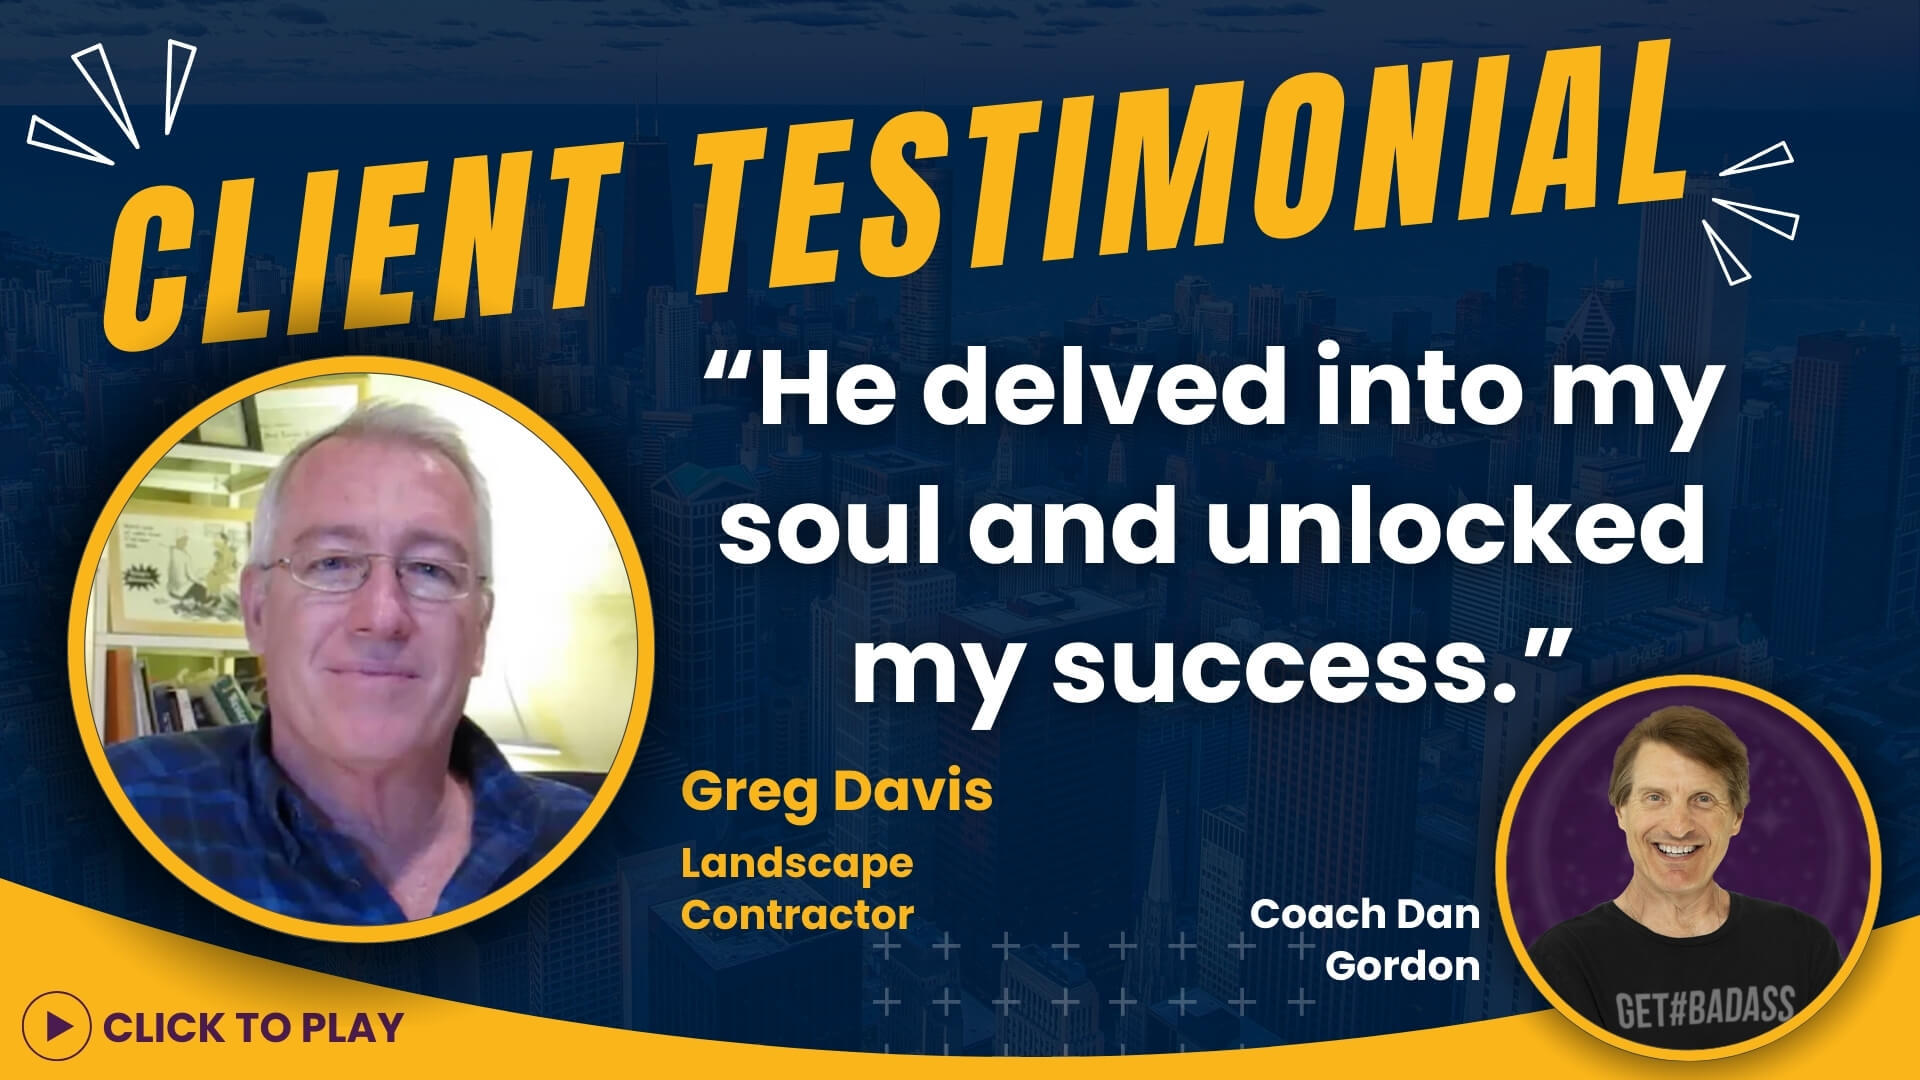 Greg Davis, Landscape Contractor, gives a second testimonial about Coach Dan Gordon, stating his deep understanding and unlocking of success, with a 'Click to Play' button.